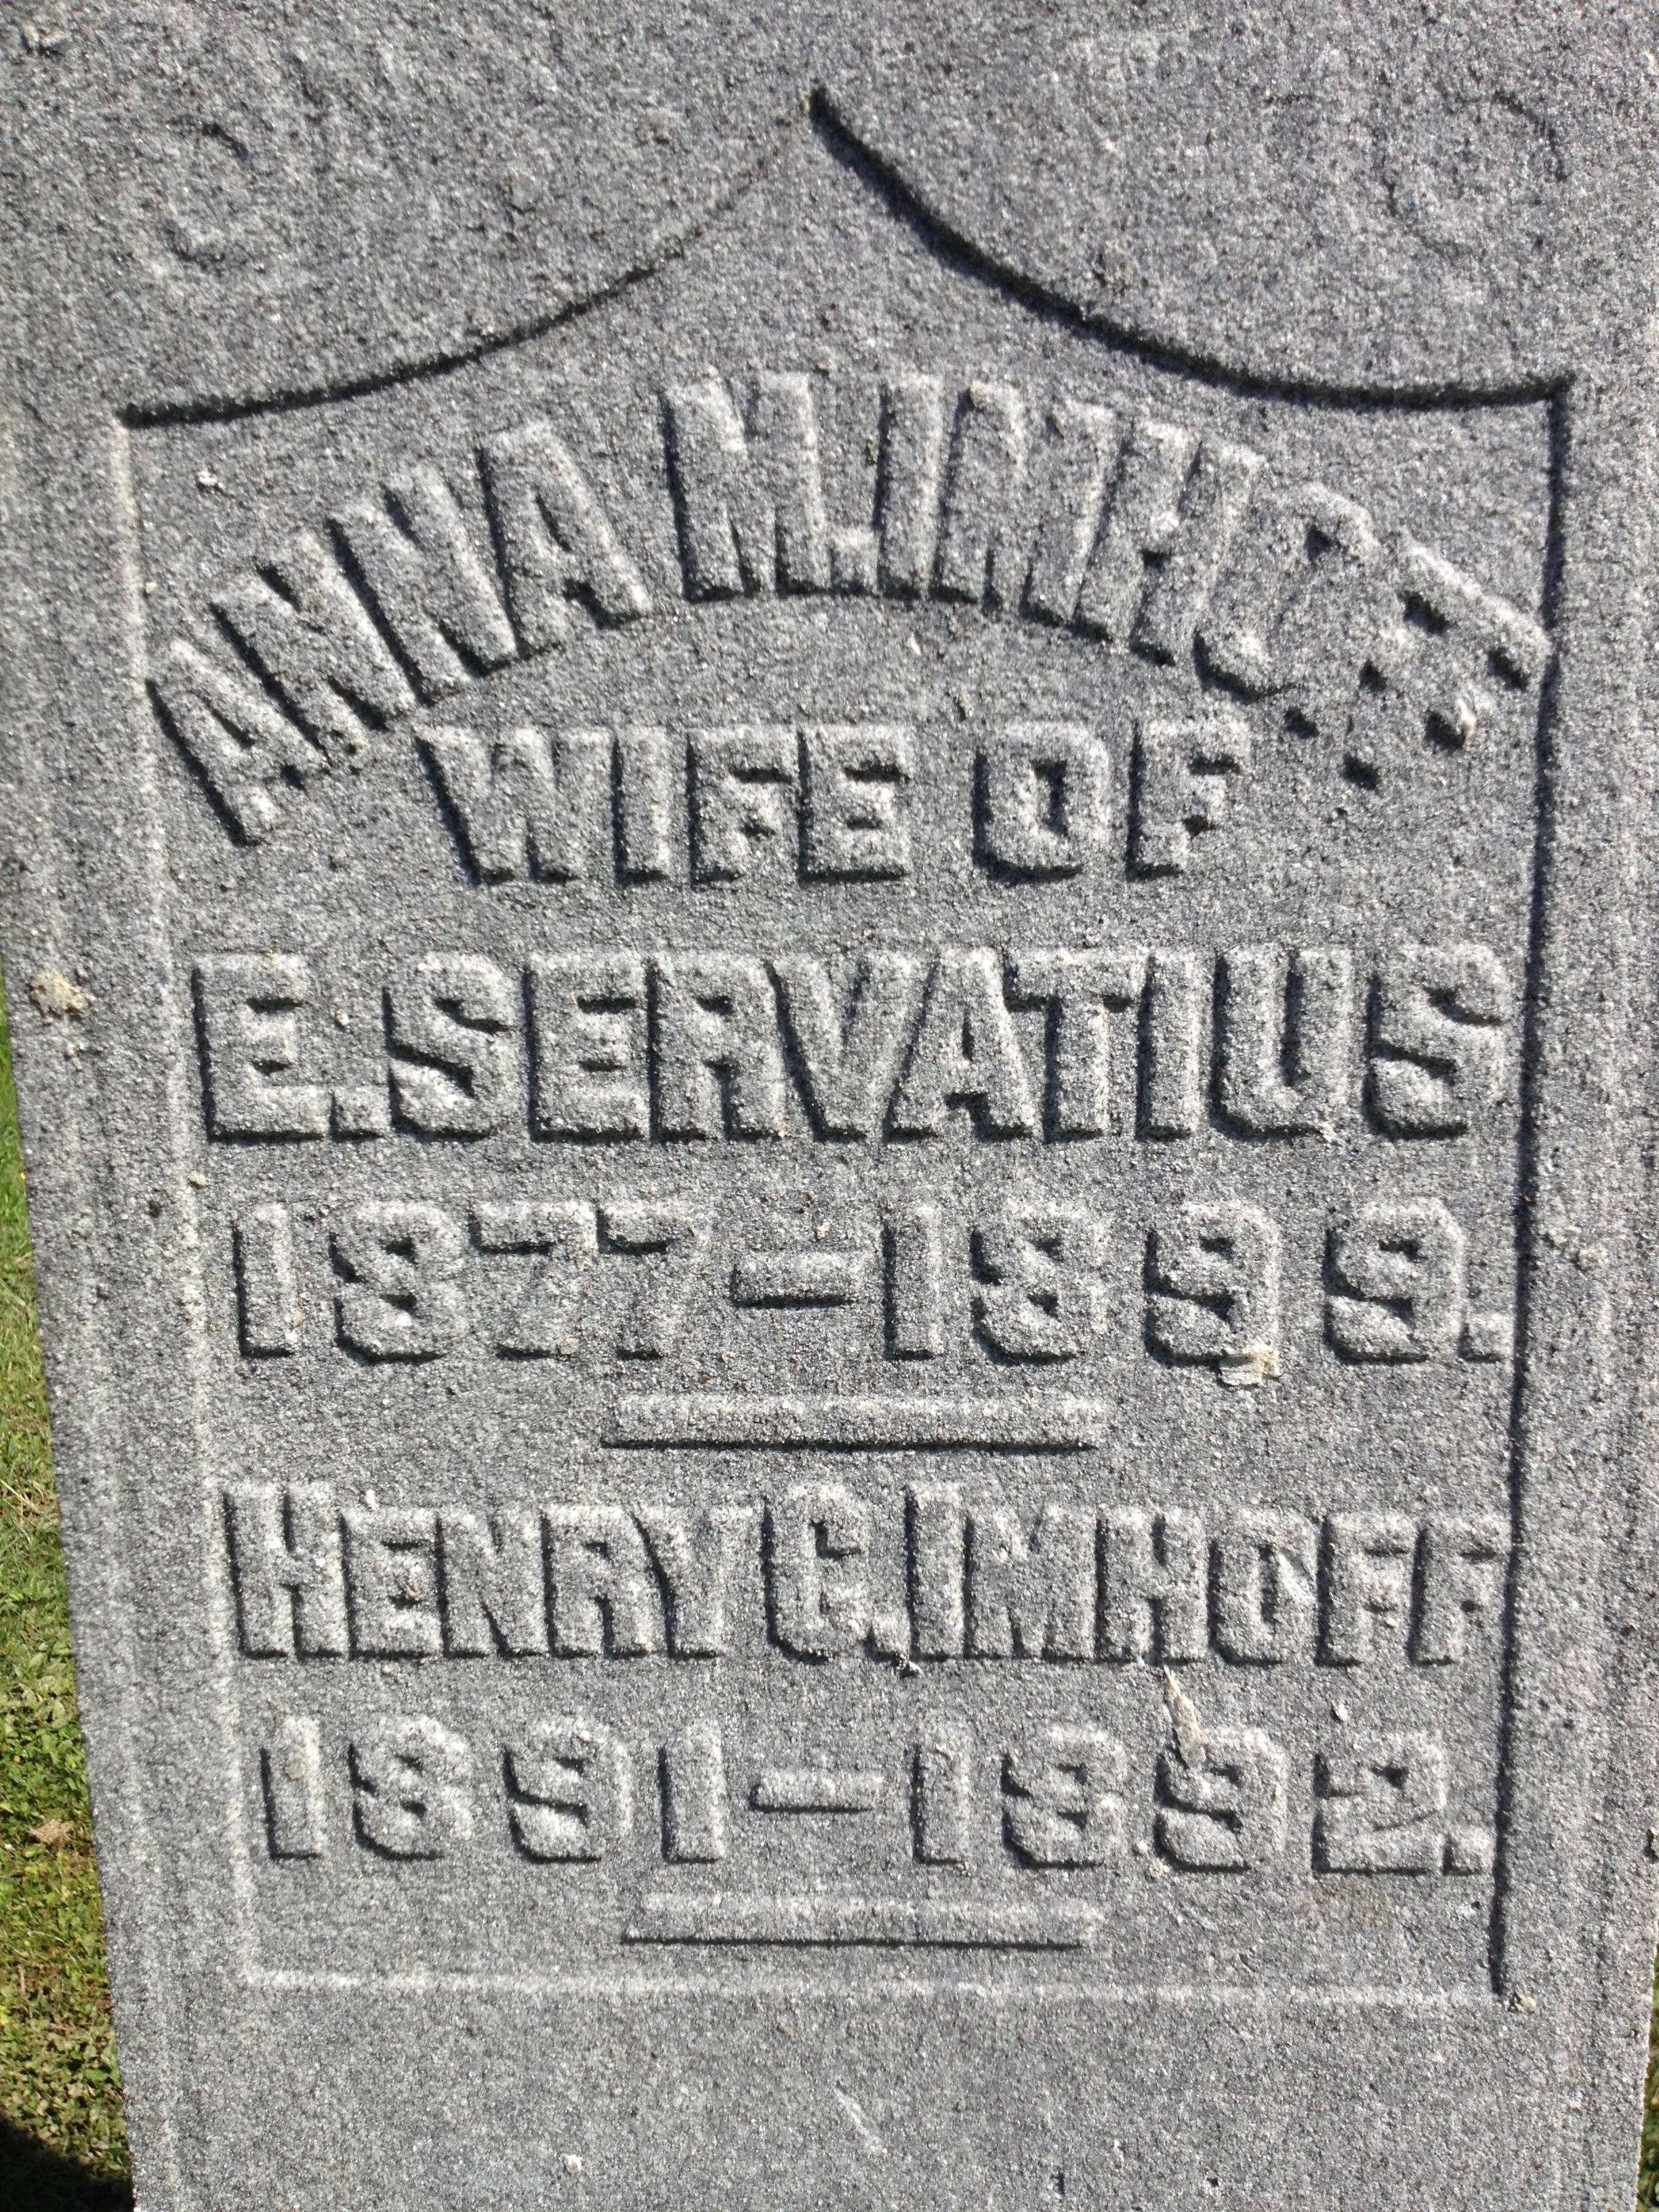 Headstone of Anna Mary Imhoff and her brother Henry Caspar Imhoff